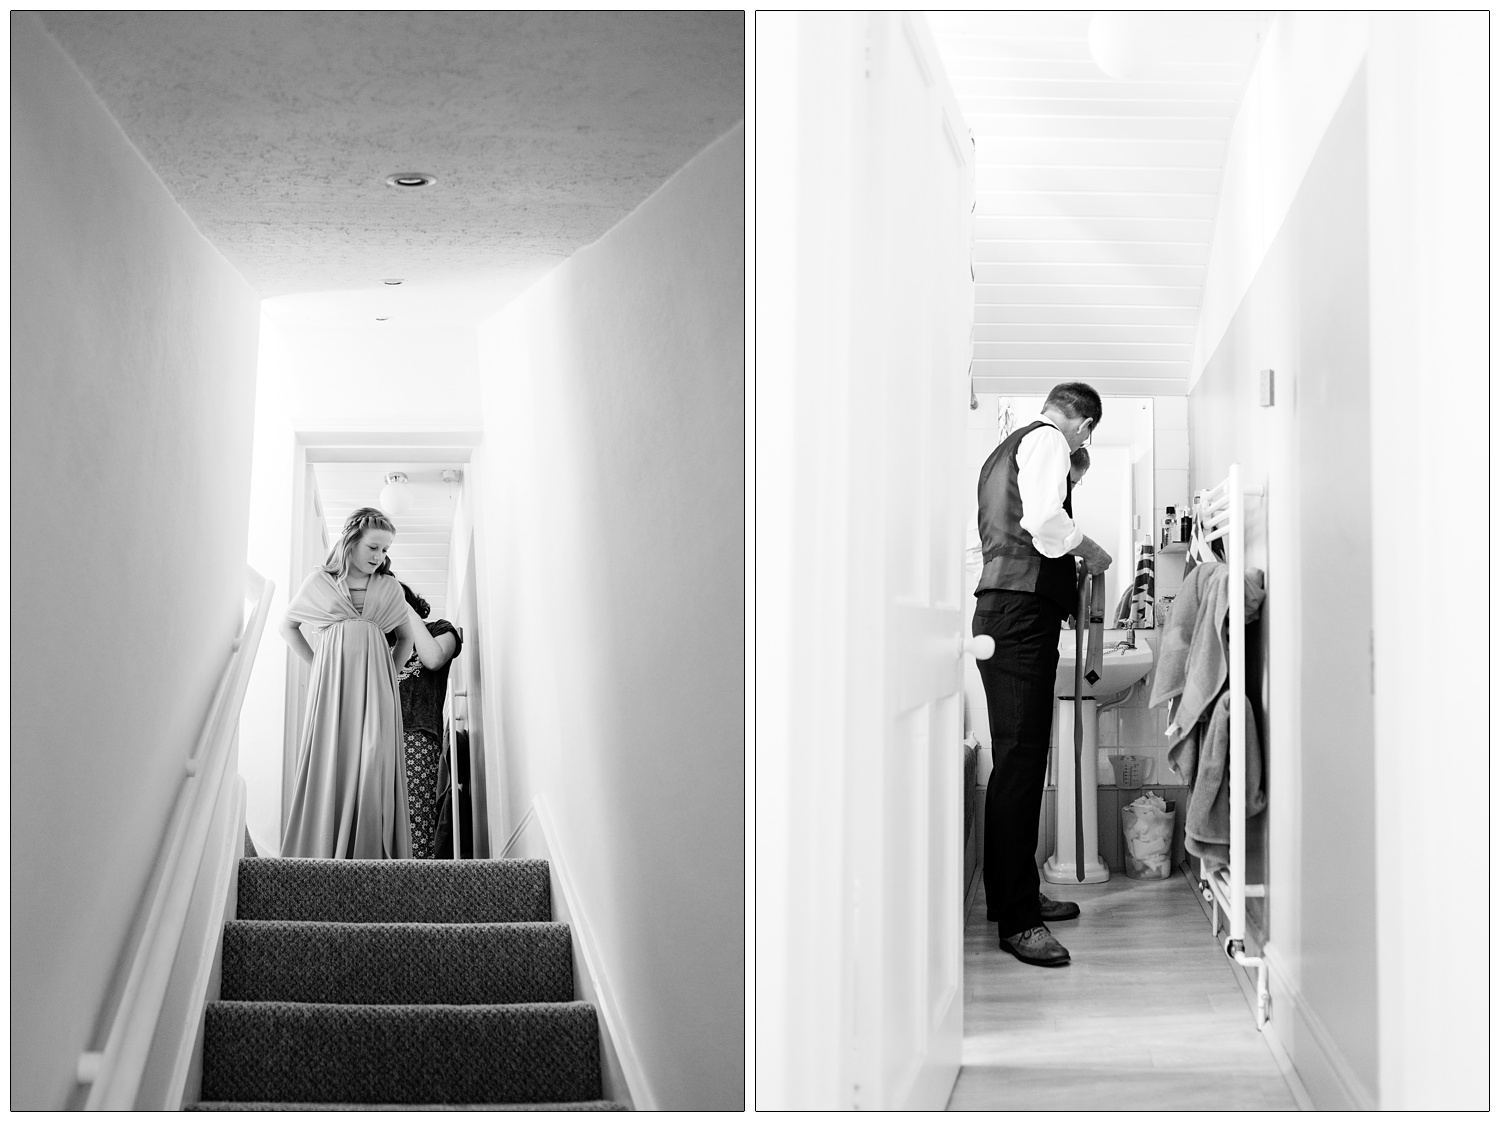 Young bridesmaid at the top of the stairs.